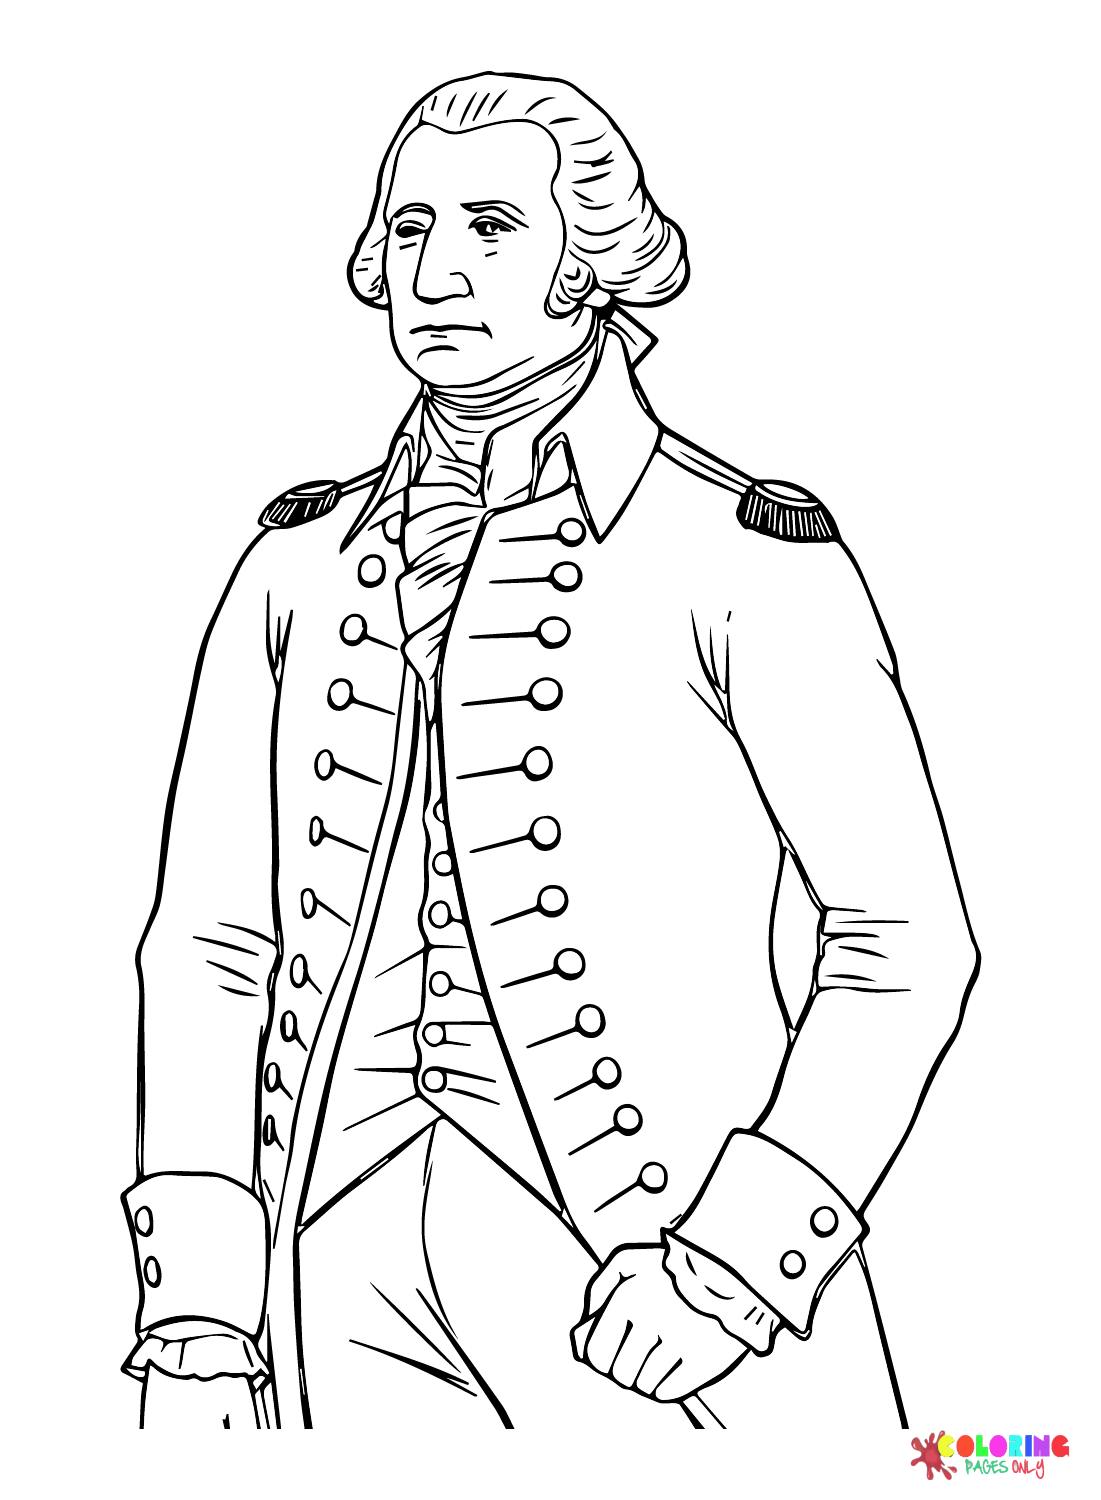 George Washington Images Coloring Page